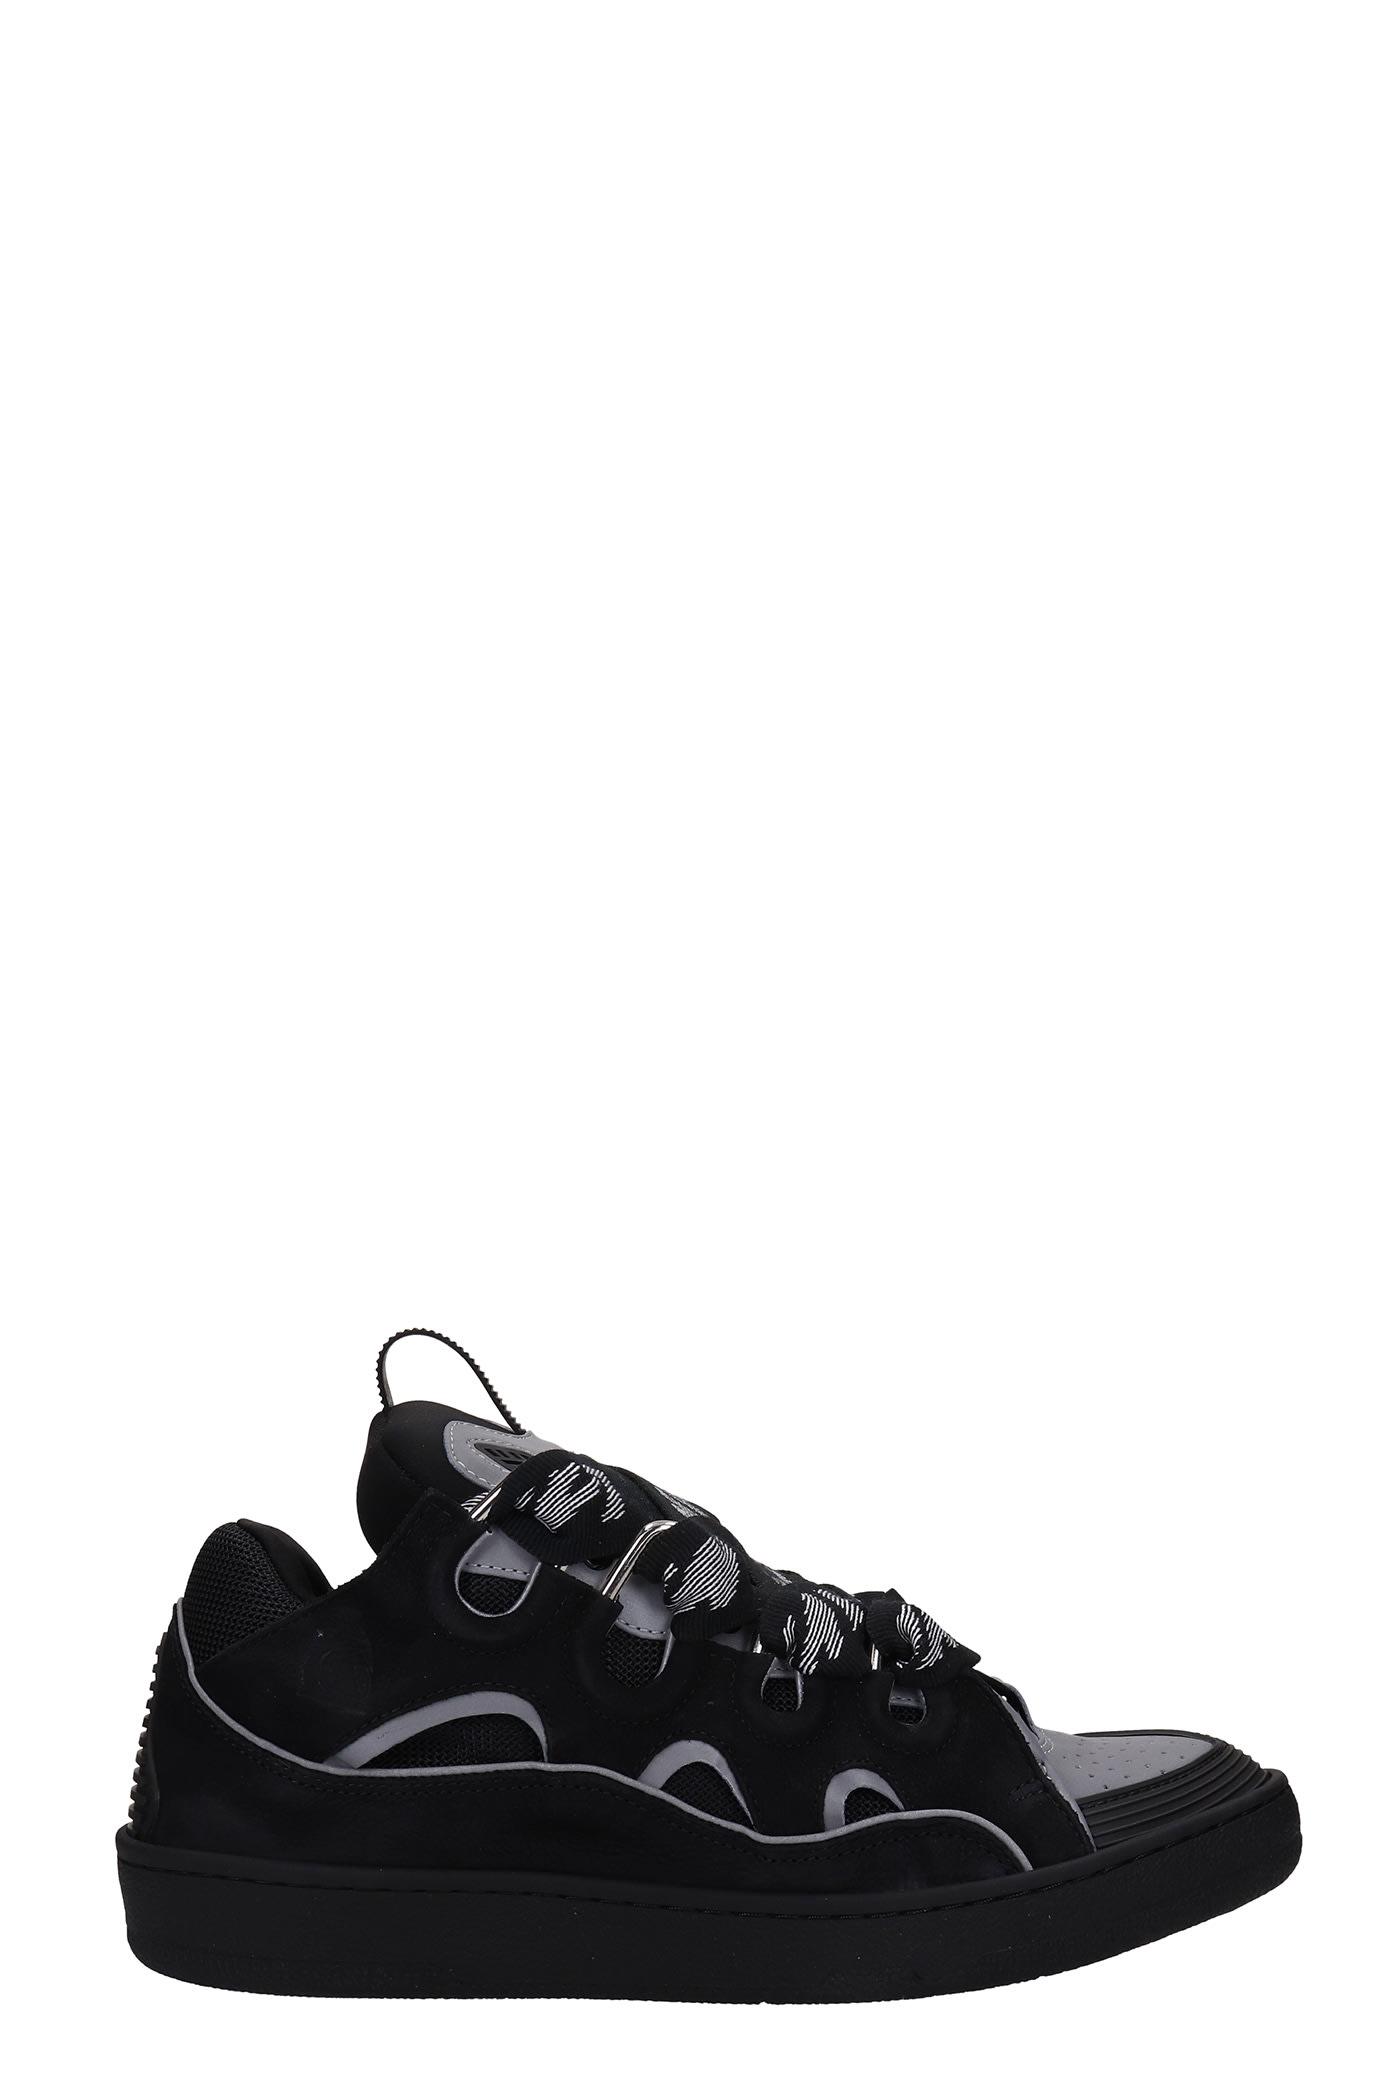 Lanvin Curb Sneakers In Leather in Black for Men | Lyst